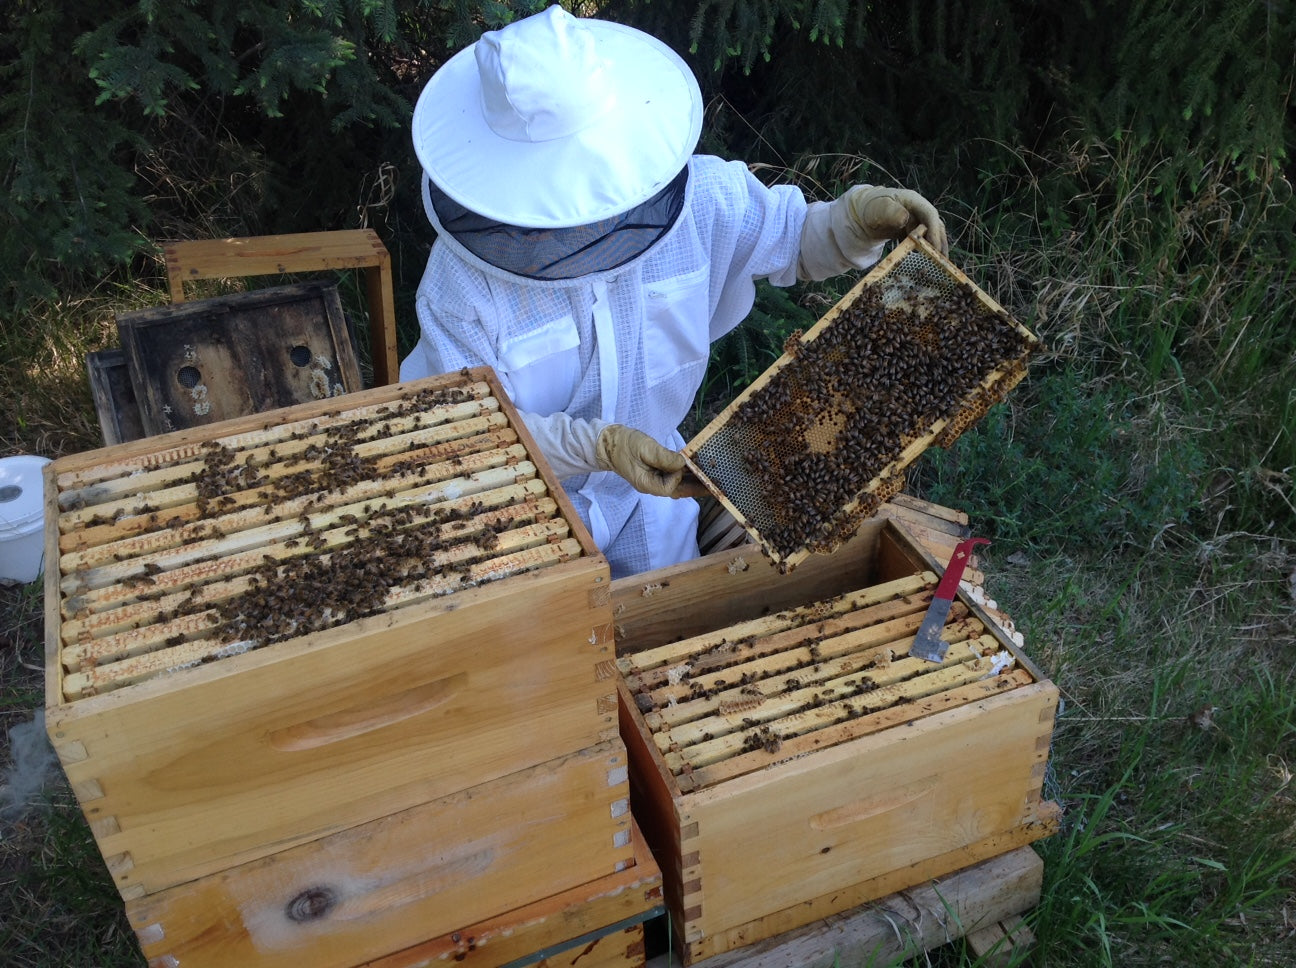 Splitting an overwintered hive: How to do it